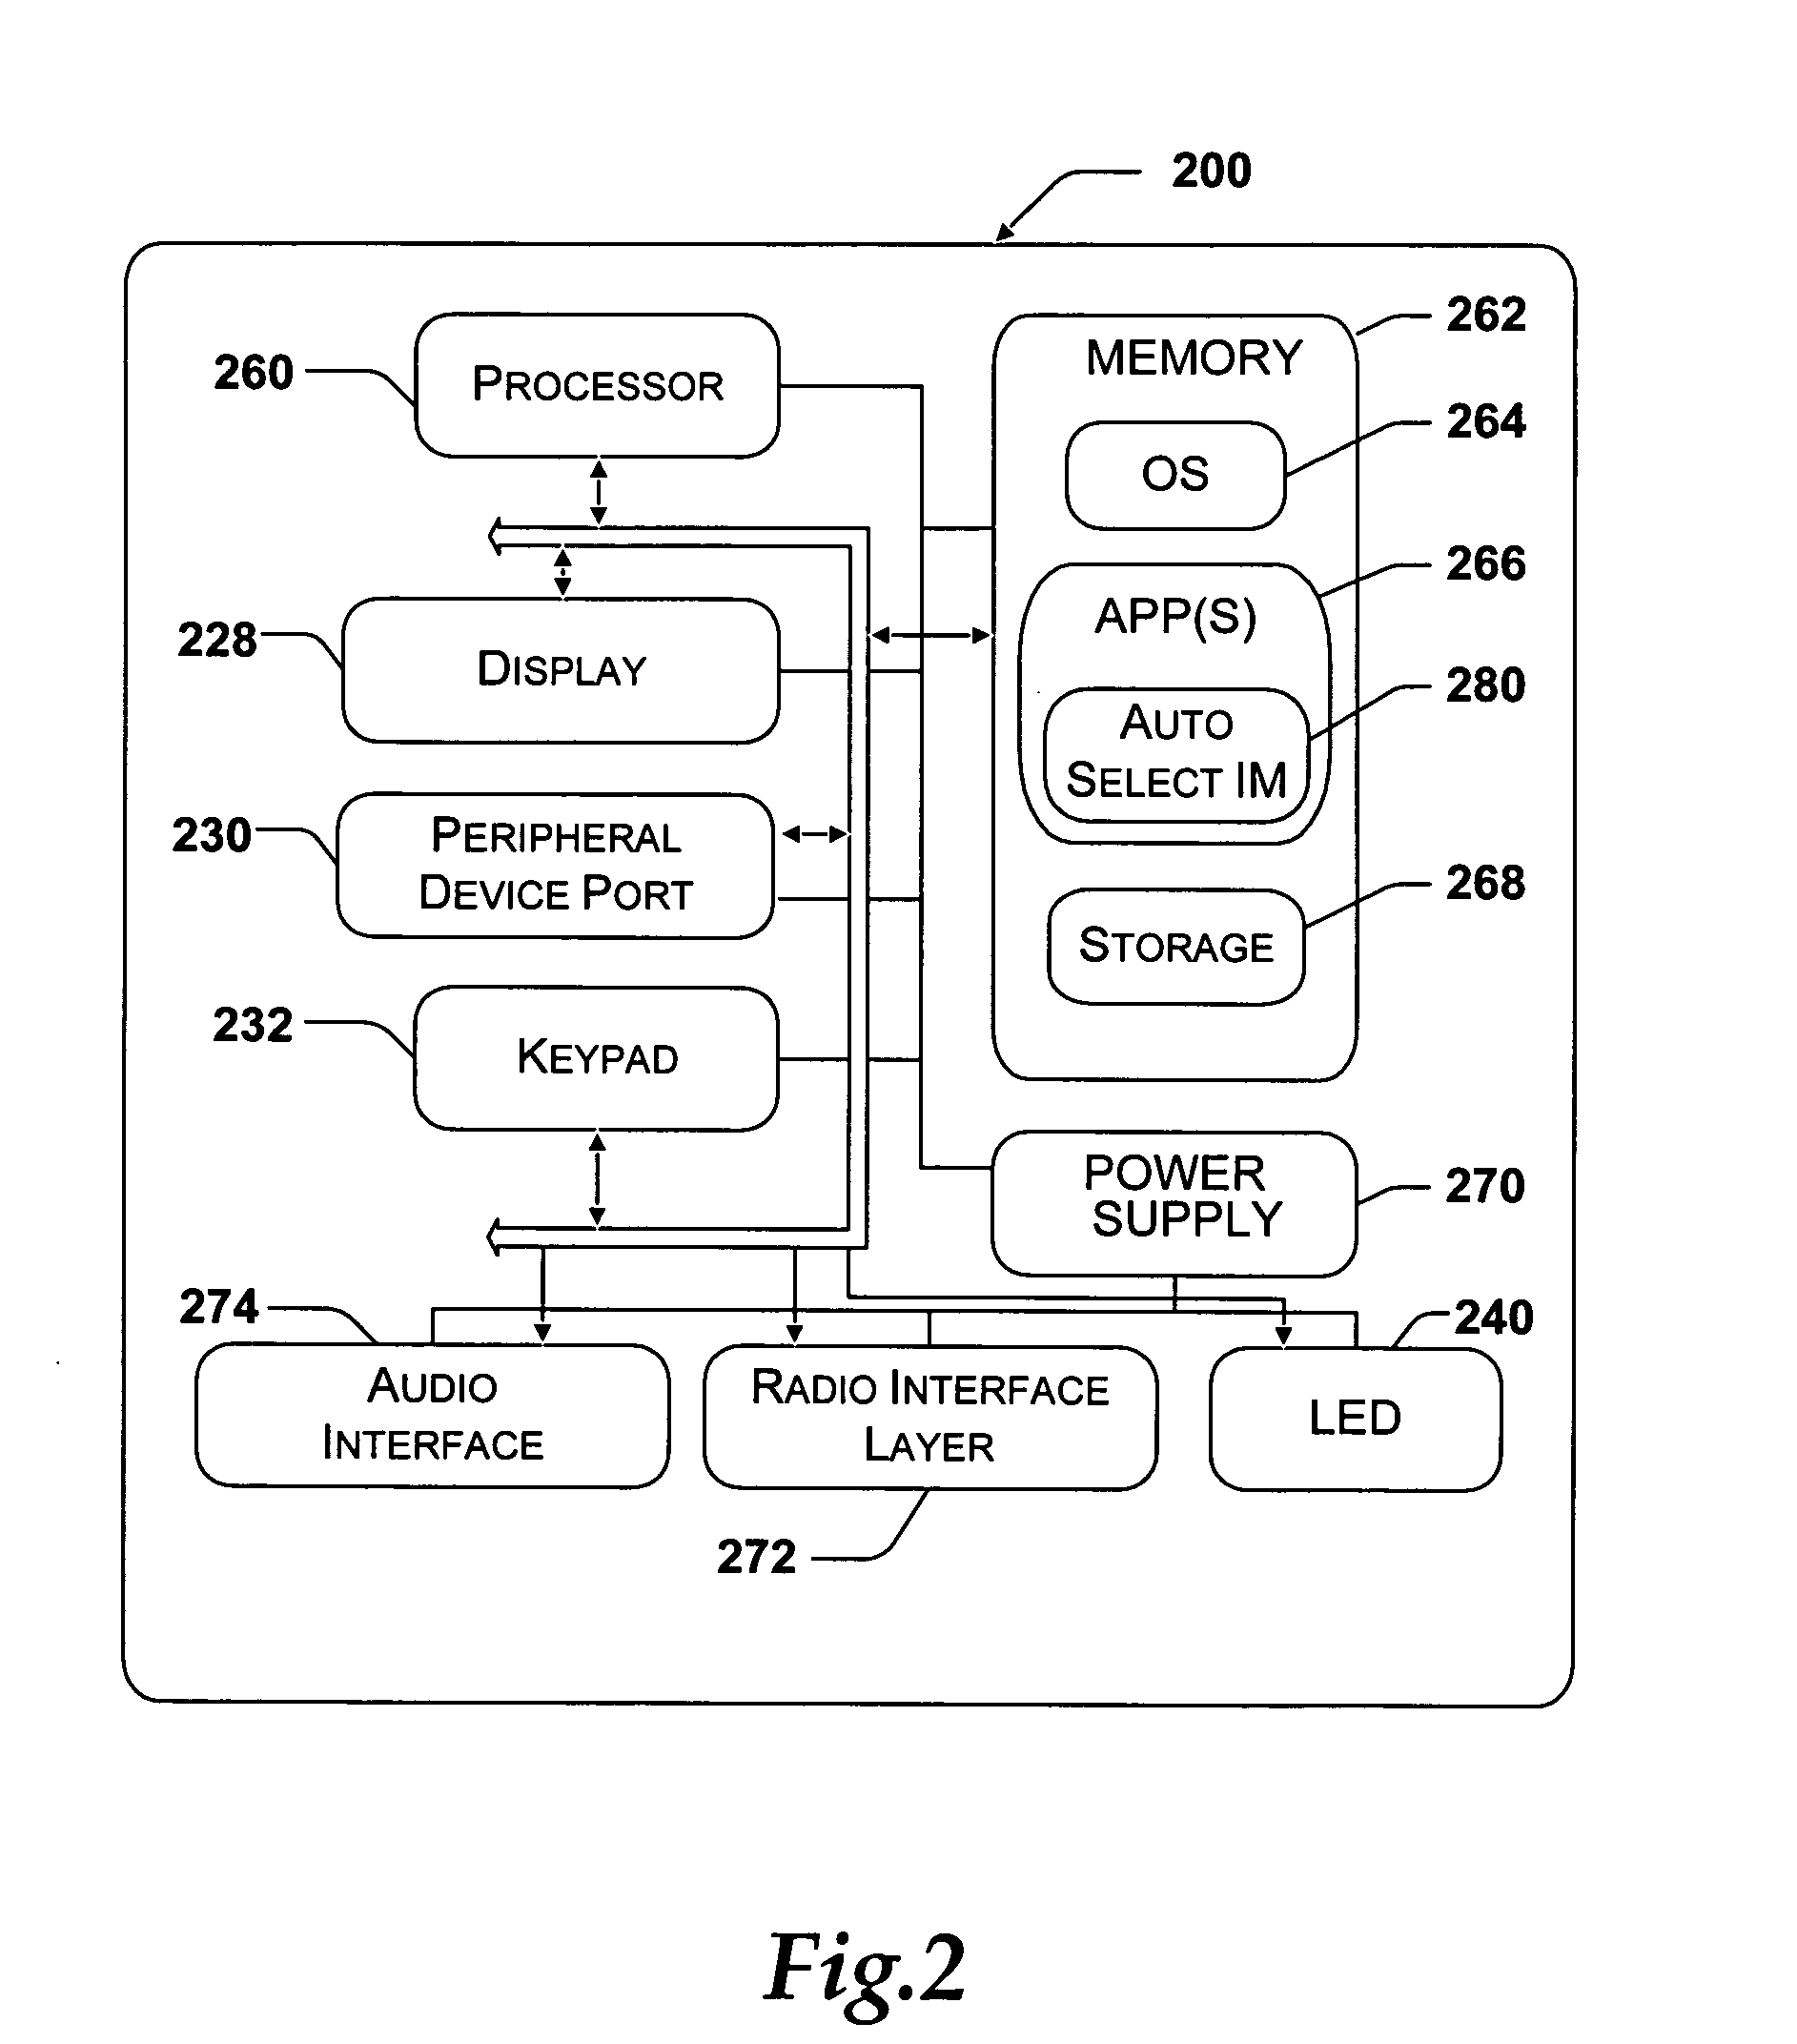 System and method for automatic selection of an instant messenger client